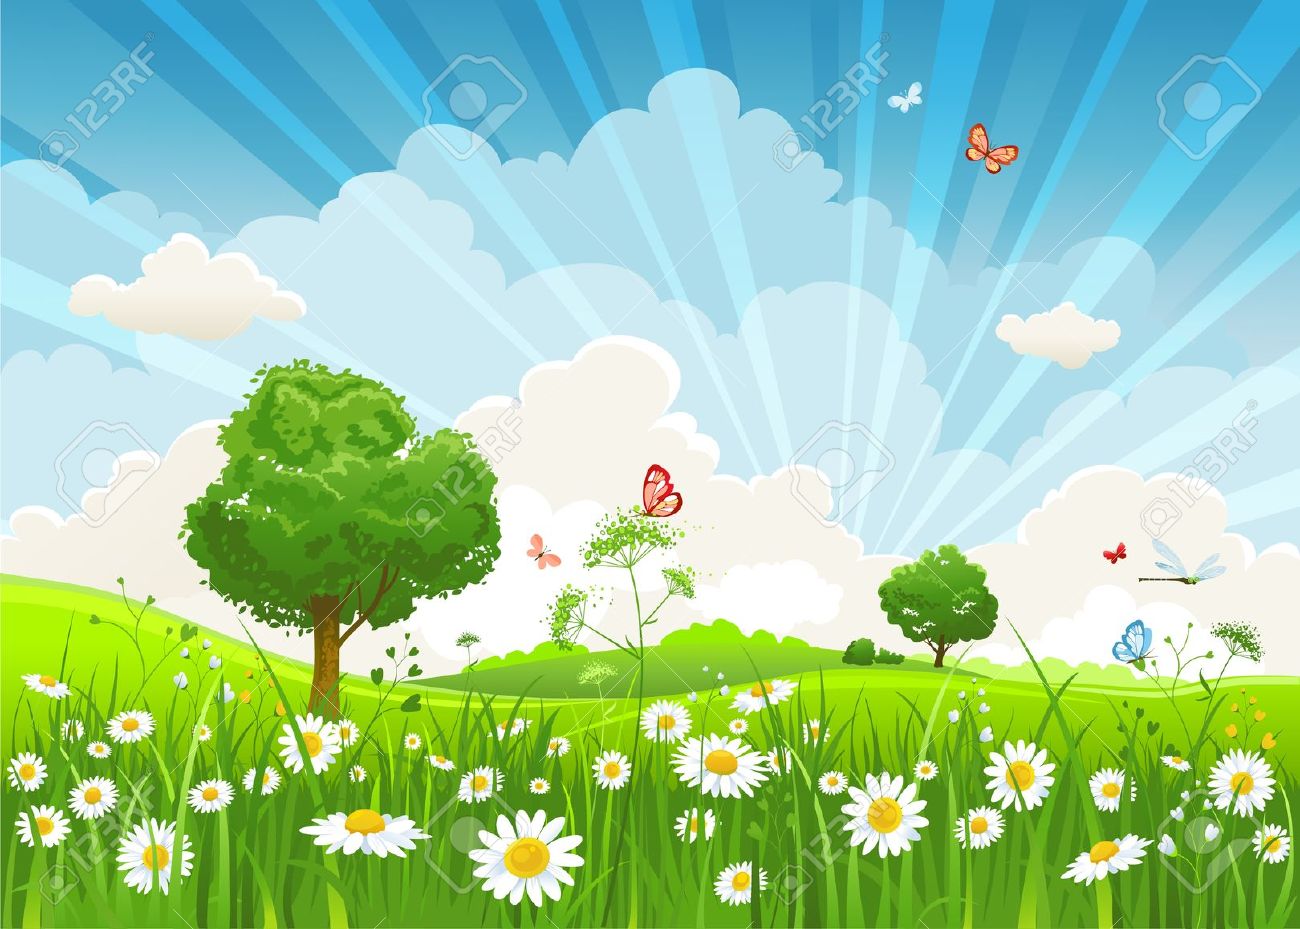 Flower meadows clipart - Clipground